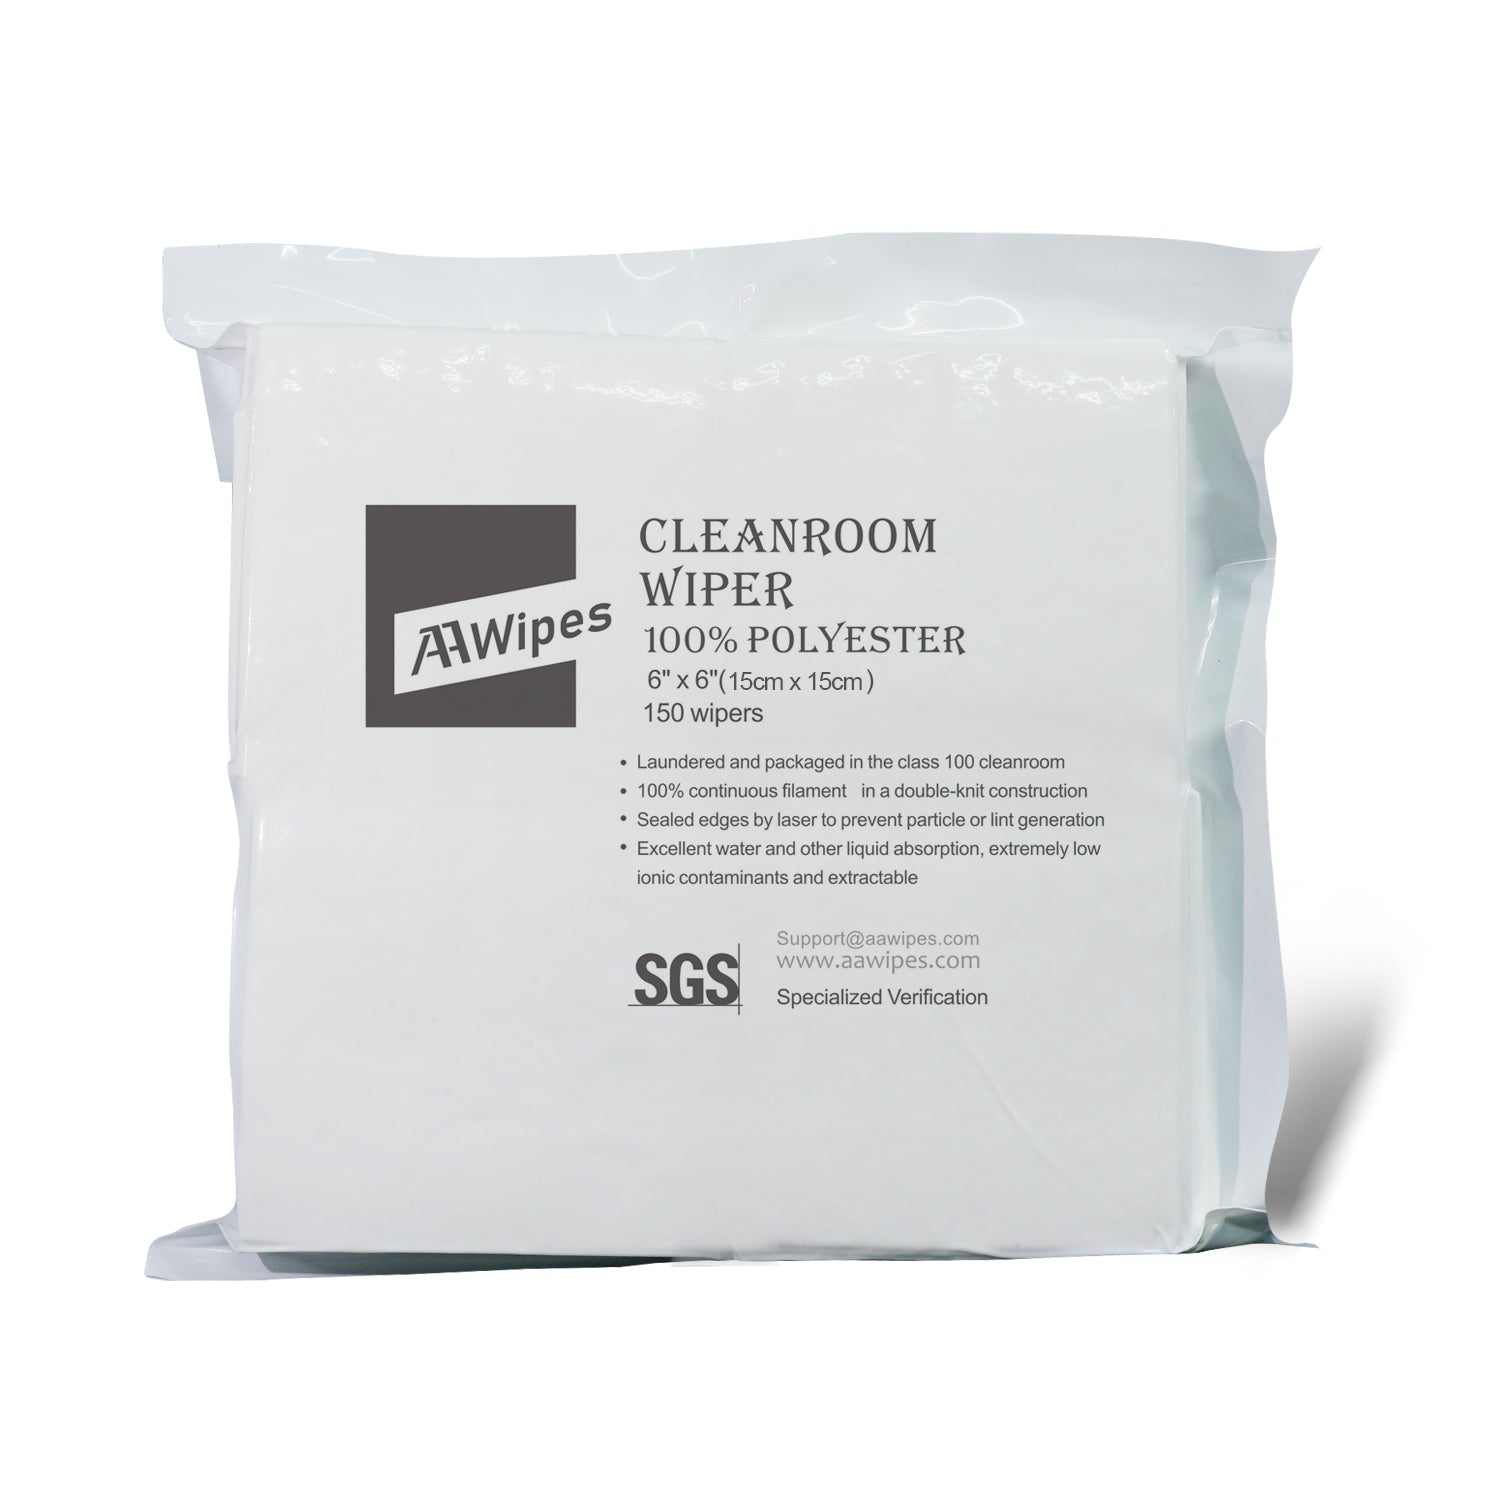 Cleanroom Wipes 6"x6" Double Knit 100% Polyester Wipers Lint Free Cloths with Ultra-fine Filaments, Laser Sealed Edge, Class 100 Cloths, Ultra-soft Wipes for Sensitive Device Cleaning. 15,000 wipes/case, 100 bags (No. CP14006).